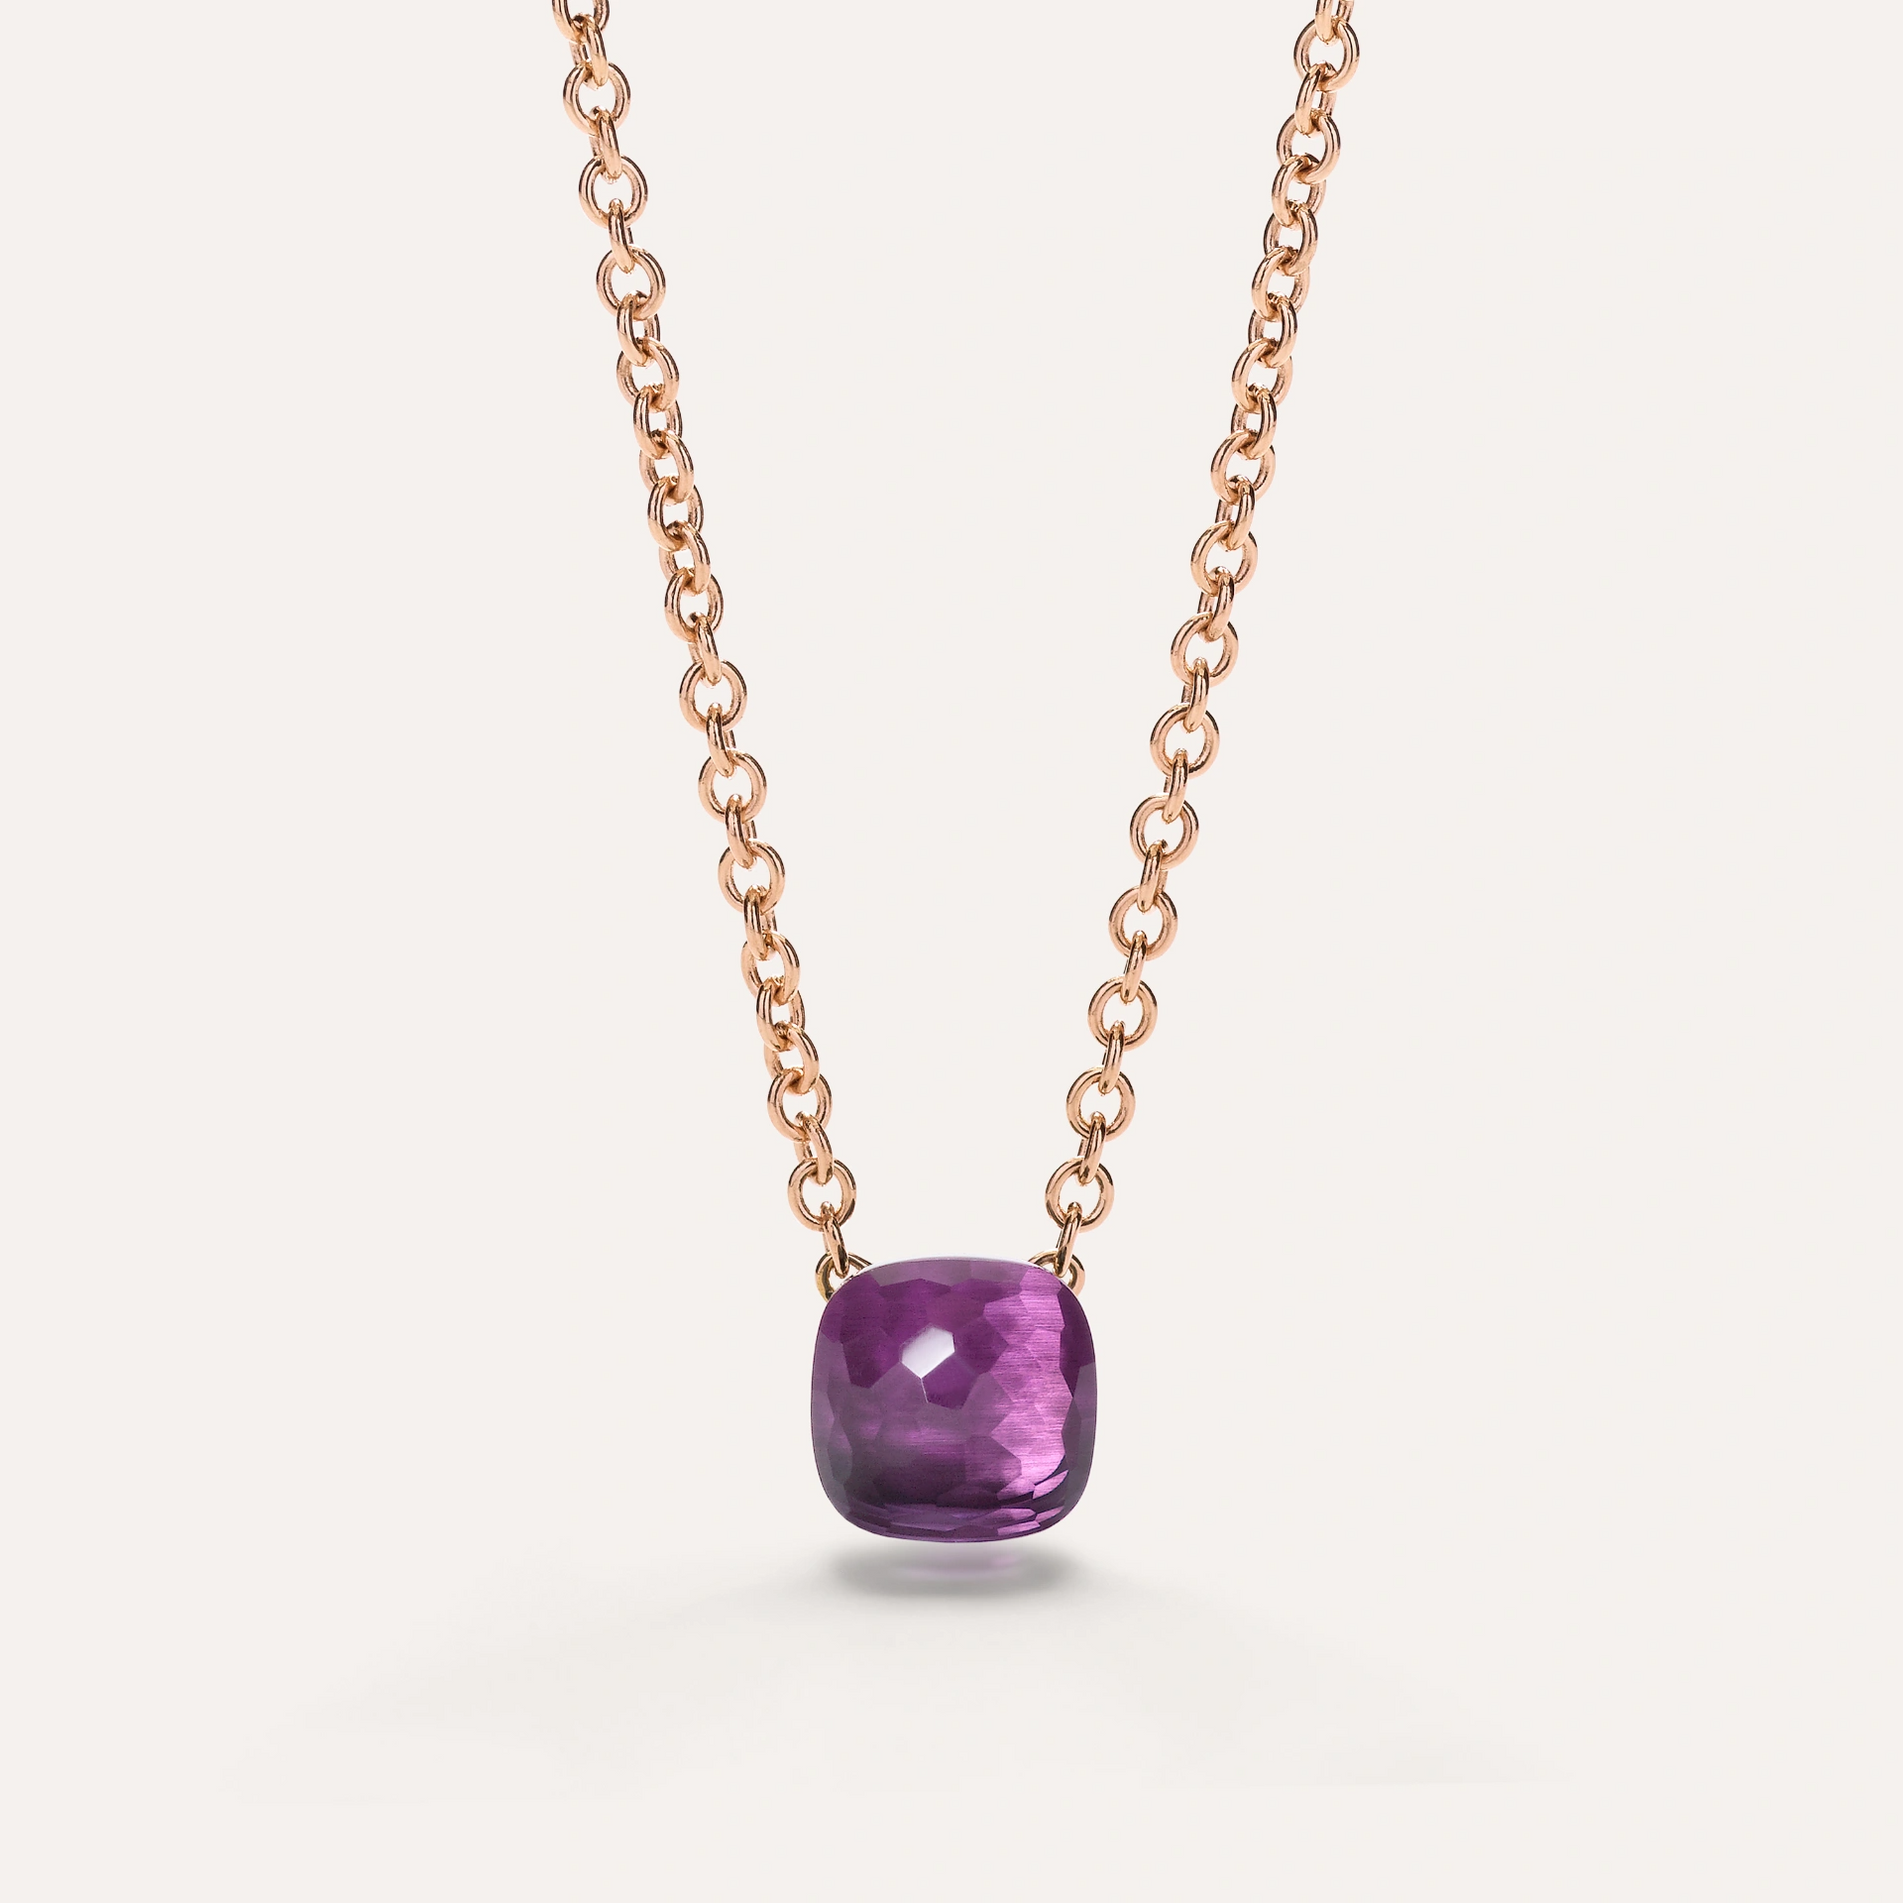 Pomellato Nudo Necklace with Petit Pendant, 18k Gold with Amethyst - Orsini Jewellers